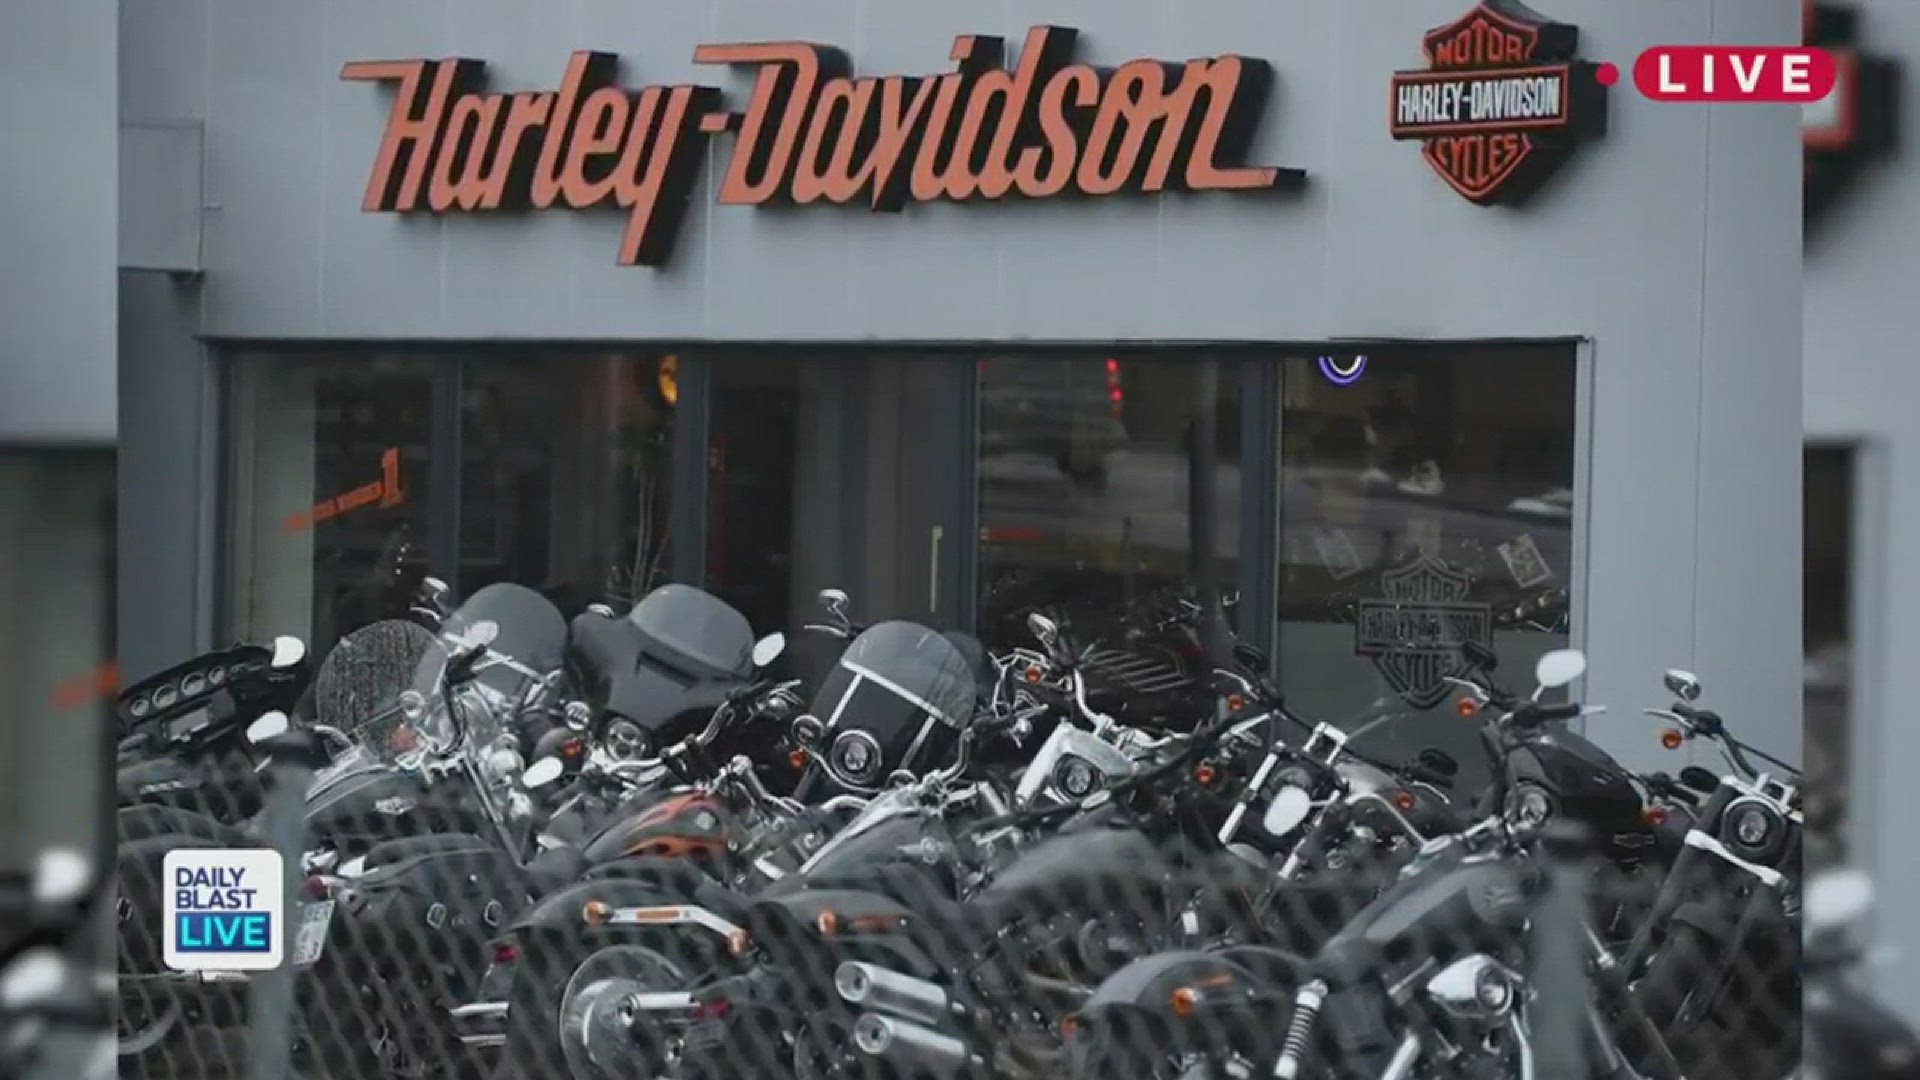 Looking for a summer job that won't keep you caged in a cubicle? Renowned motorcycle dealer, Harley-Davidson, is selecting eight college students to ride around the world documenting their experiences along the way. Know someone interested in this 12-week